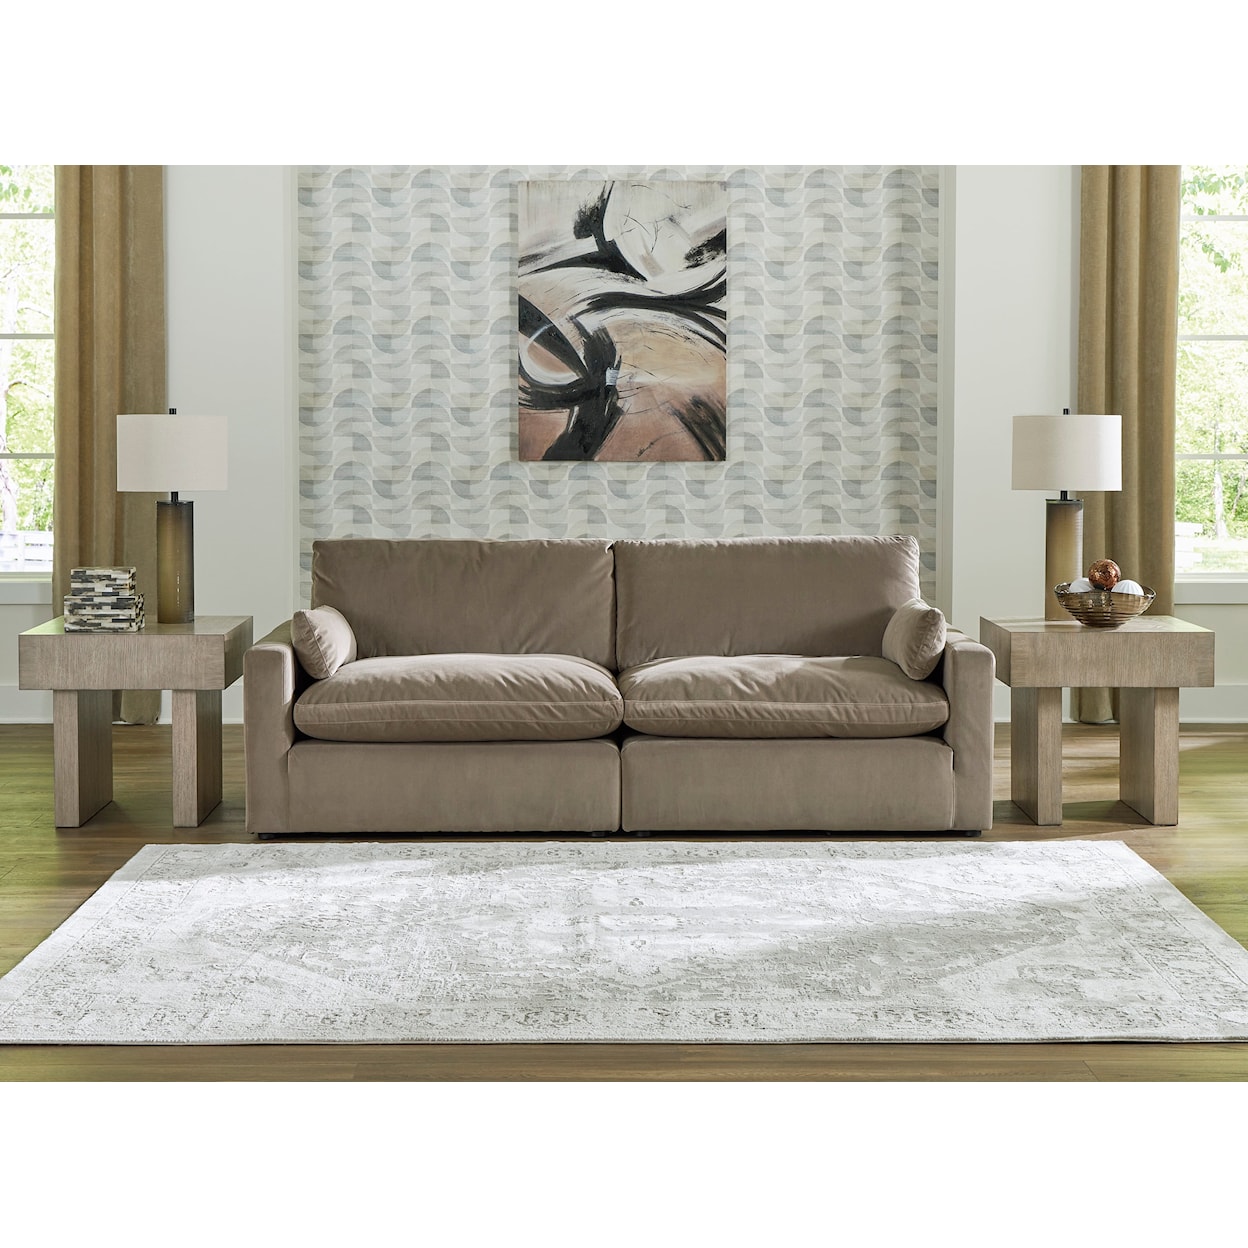 Benchcraft Sophie 2-Piece Sectional Sofa